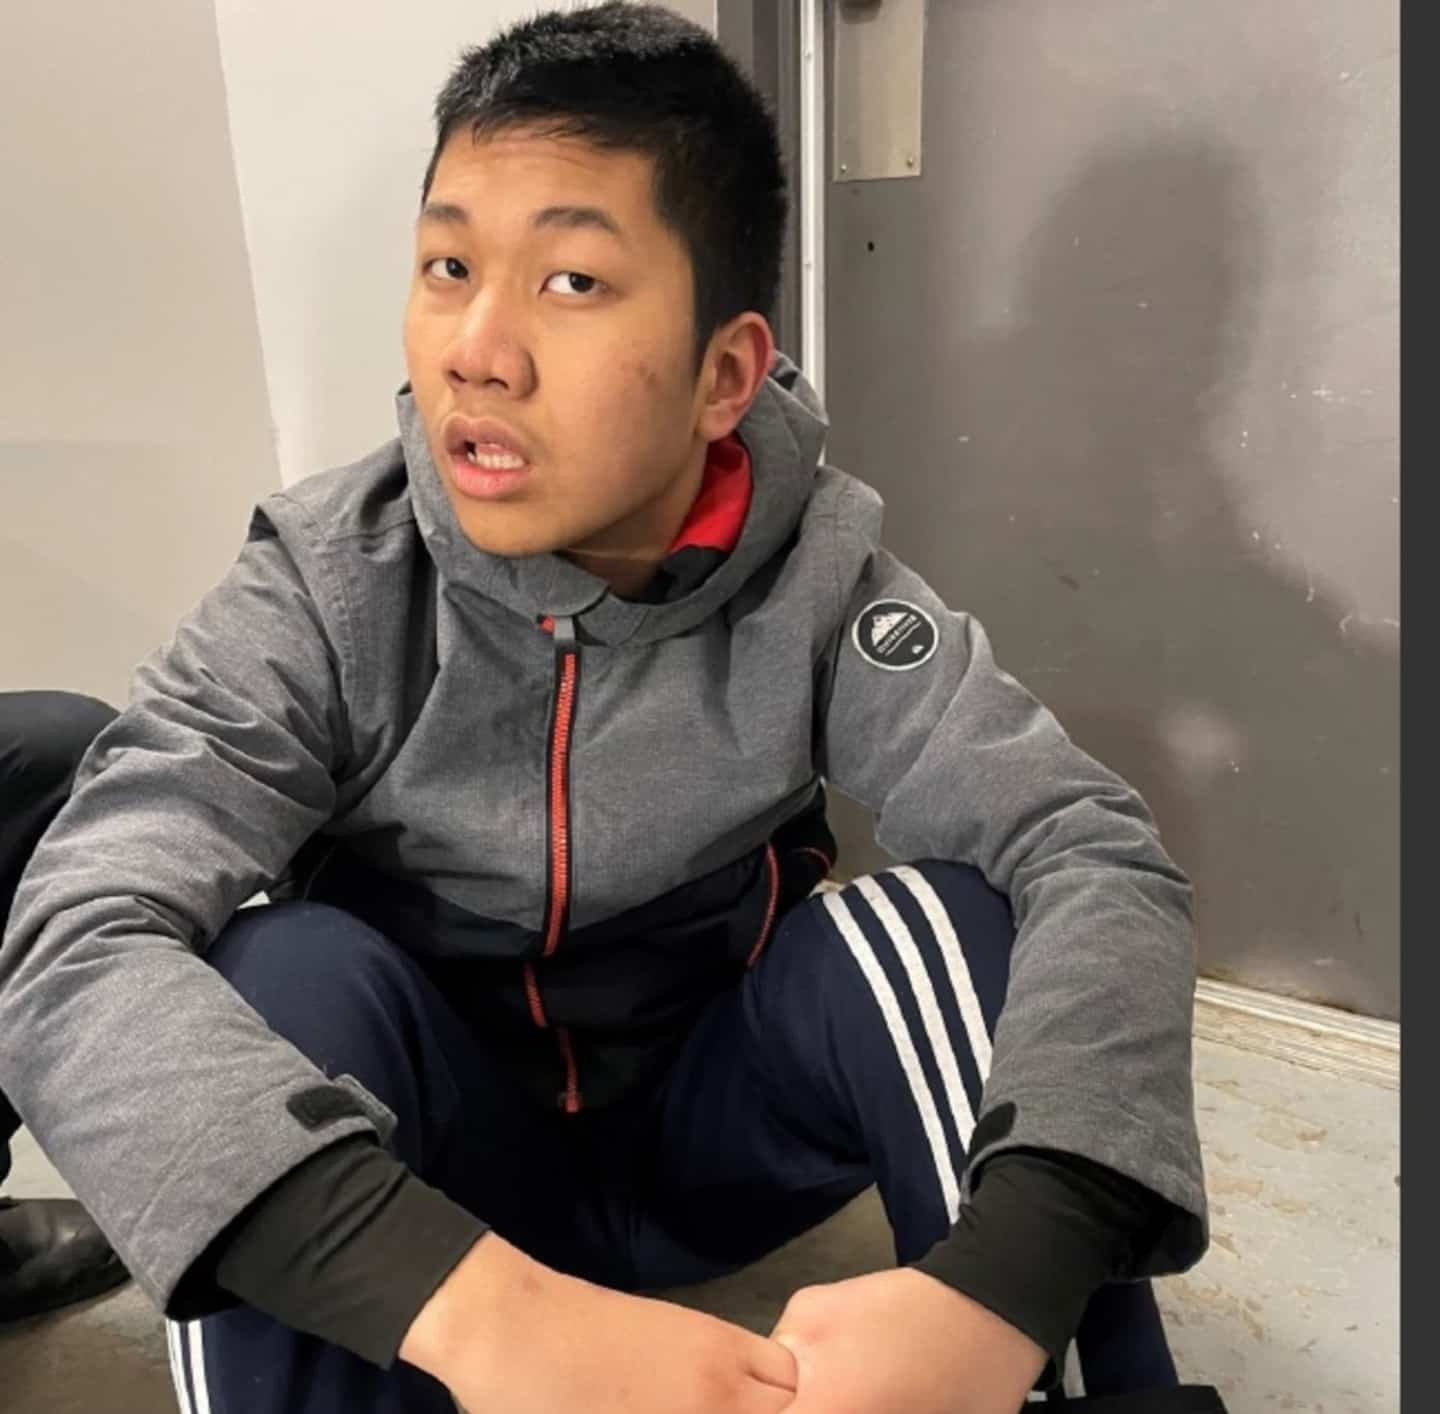 15-year-old boy missing in Montreal